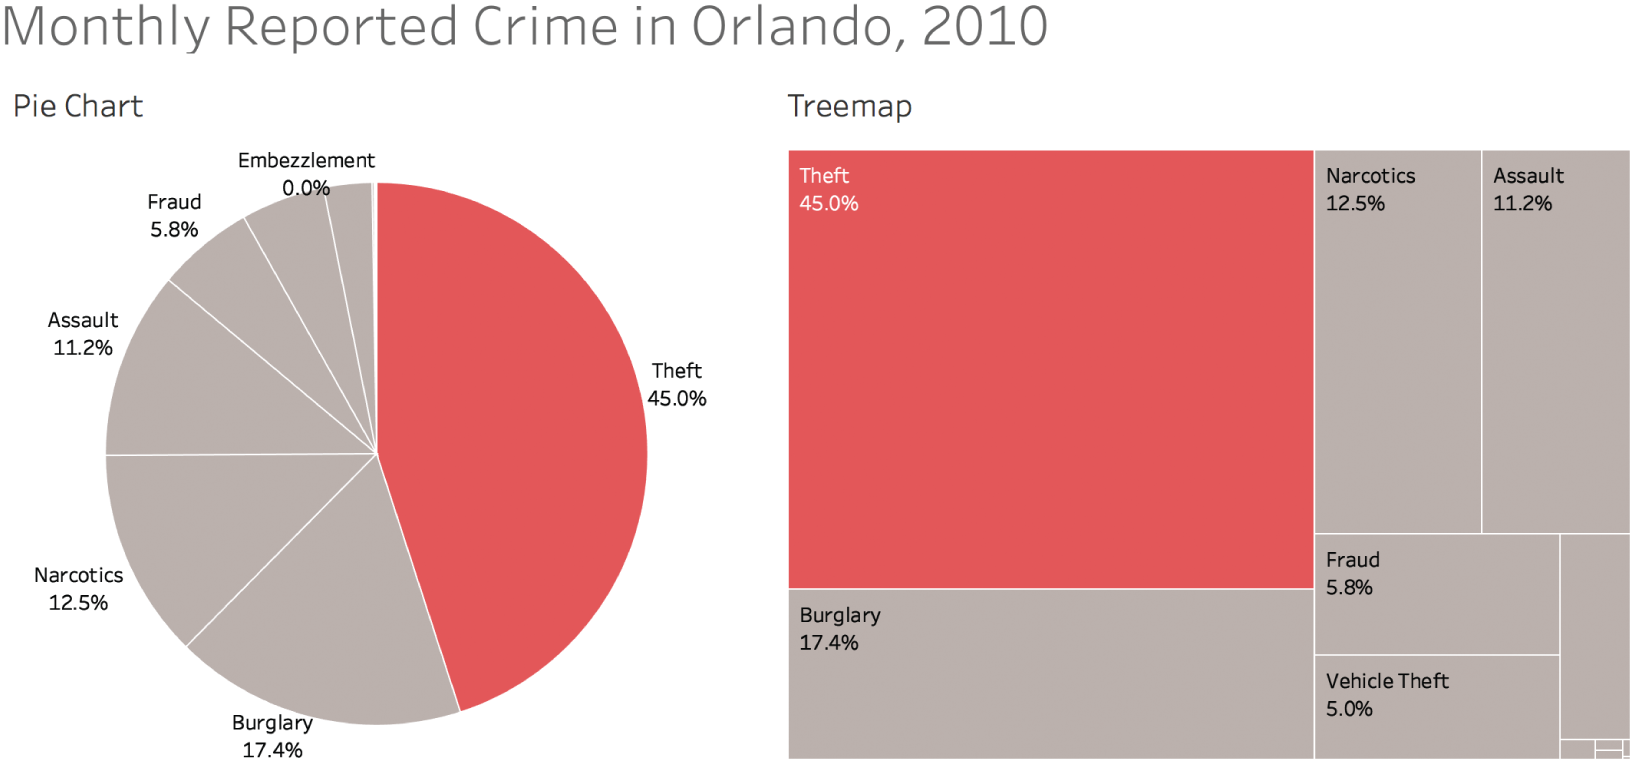 A pie chart and a treemap depicting the breakdown of reported crime by category for the year 2010.